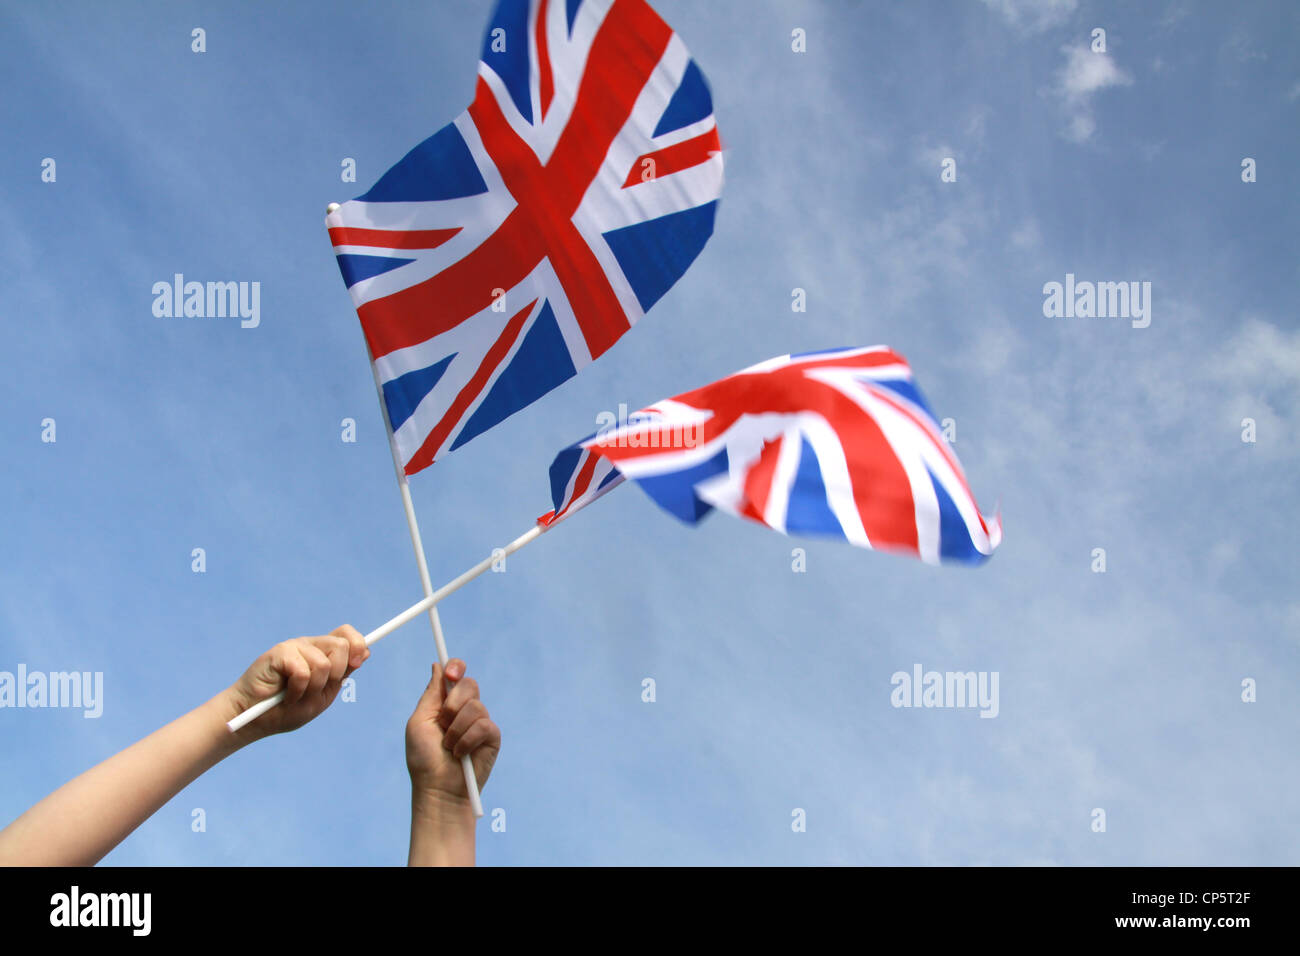 Jubilee United kingdom flags blowing in wind with blue sky with holding hands visible aiming for the sky Stock Photo